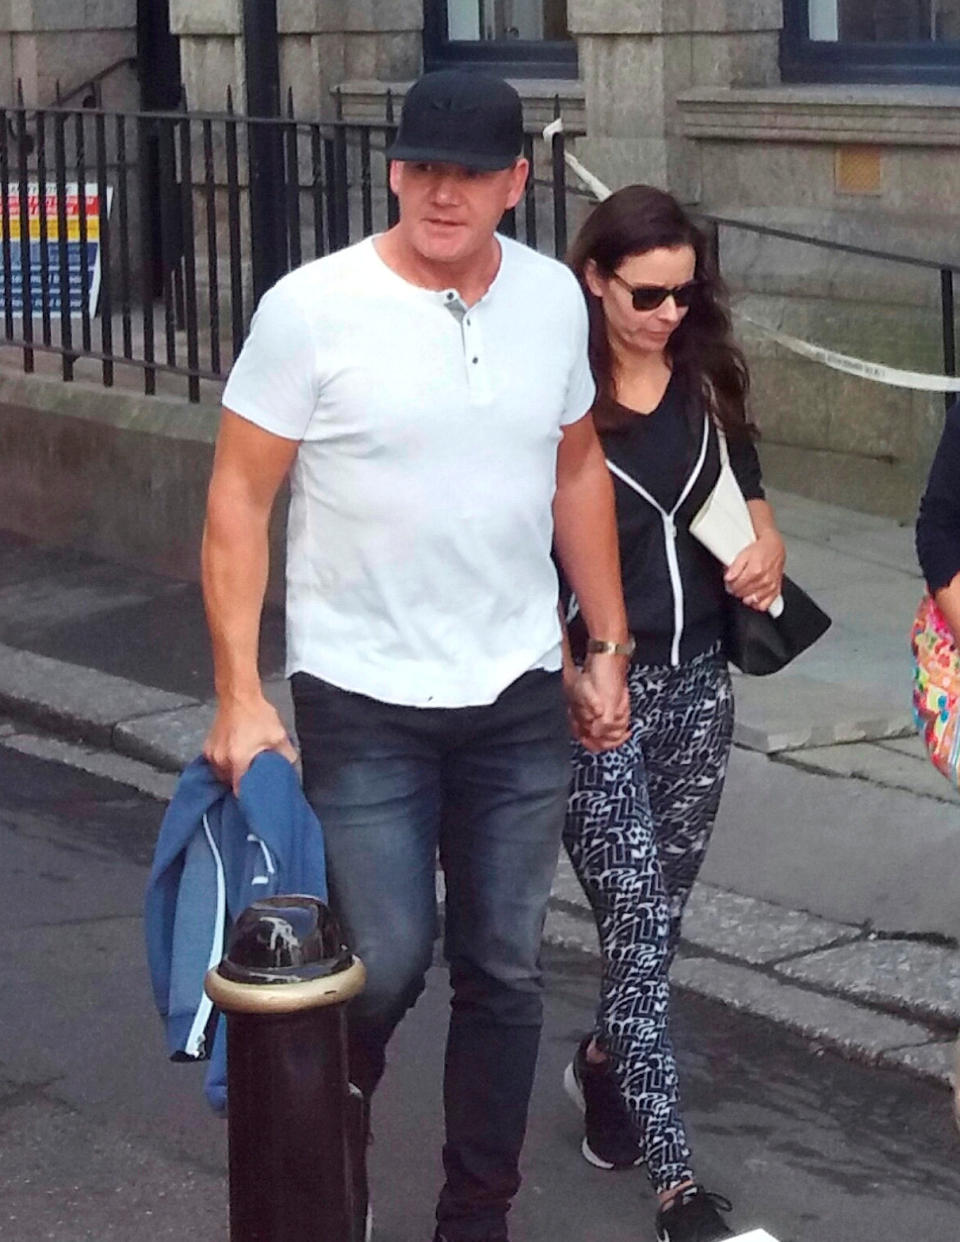 Ramsay and wife Tana were snapped as they strolled through Fowey in August (SWNS.com)